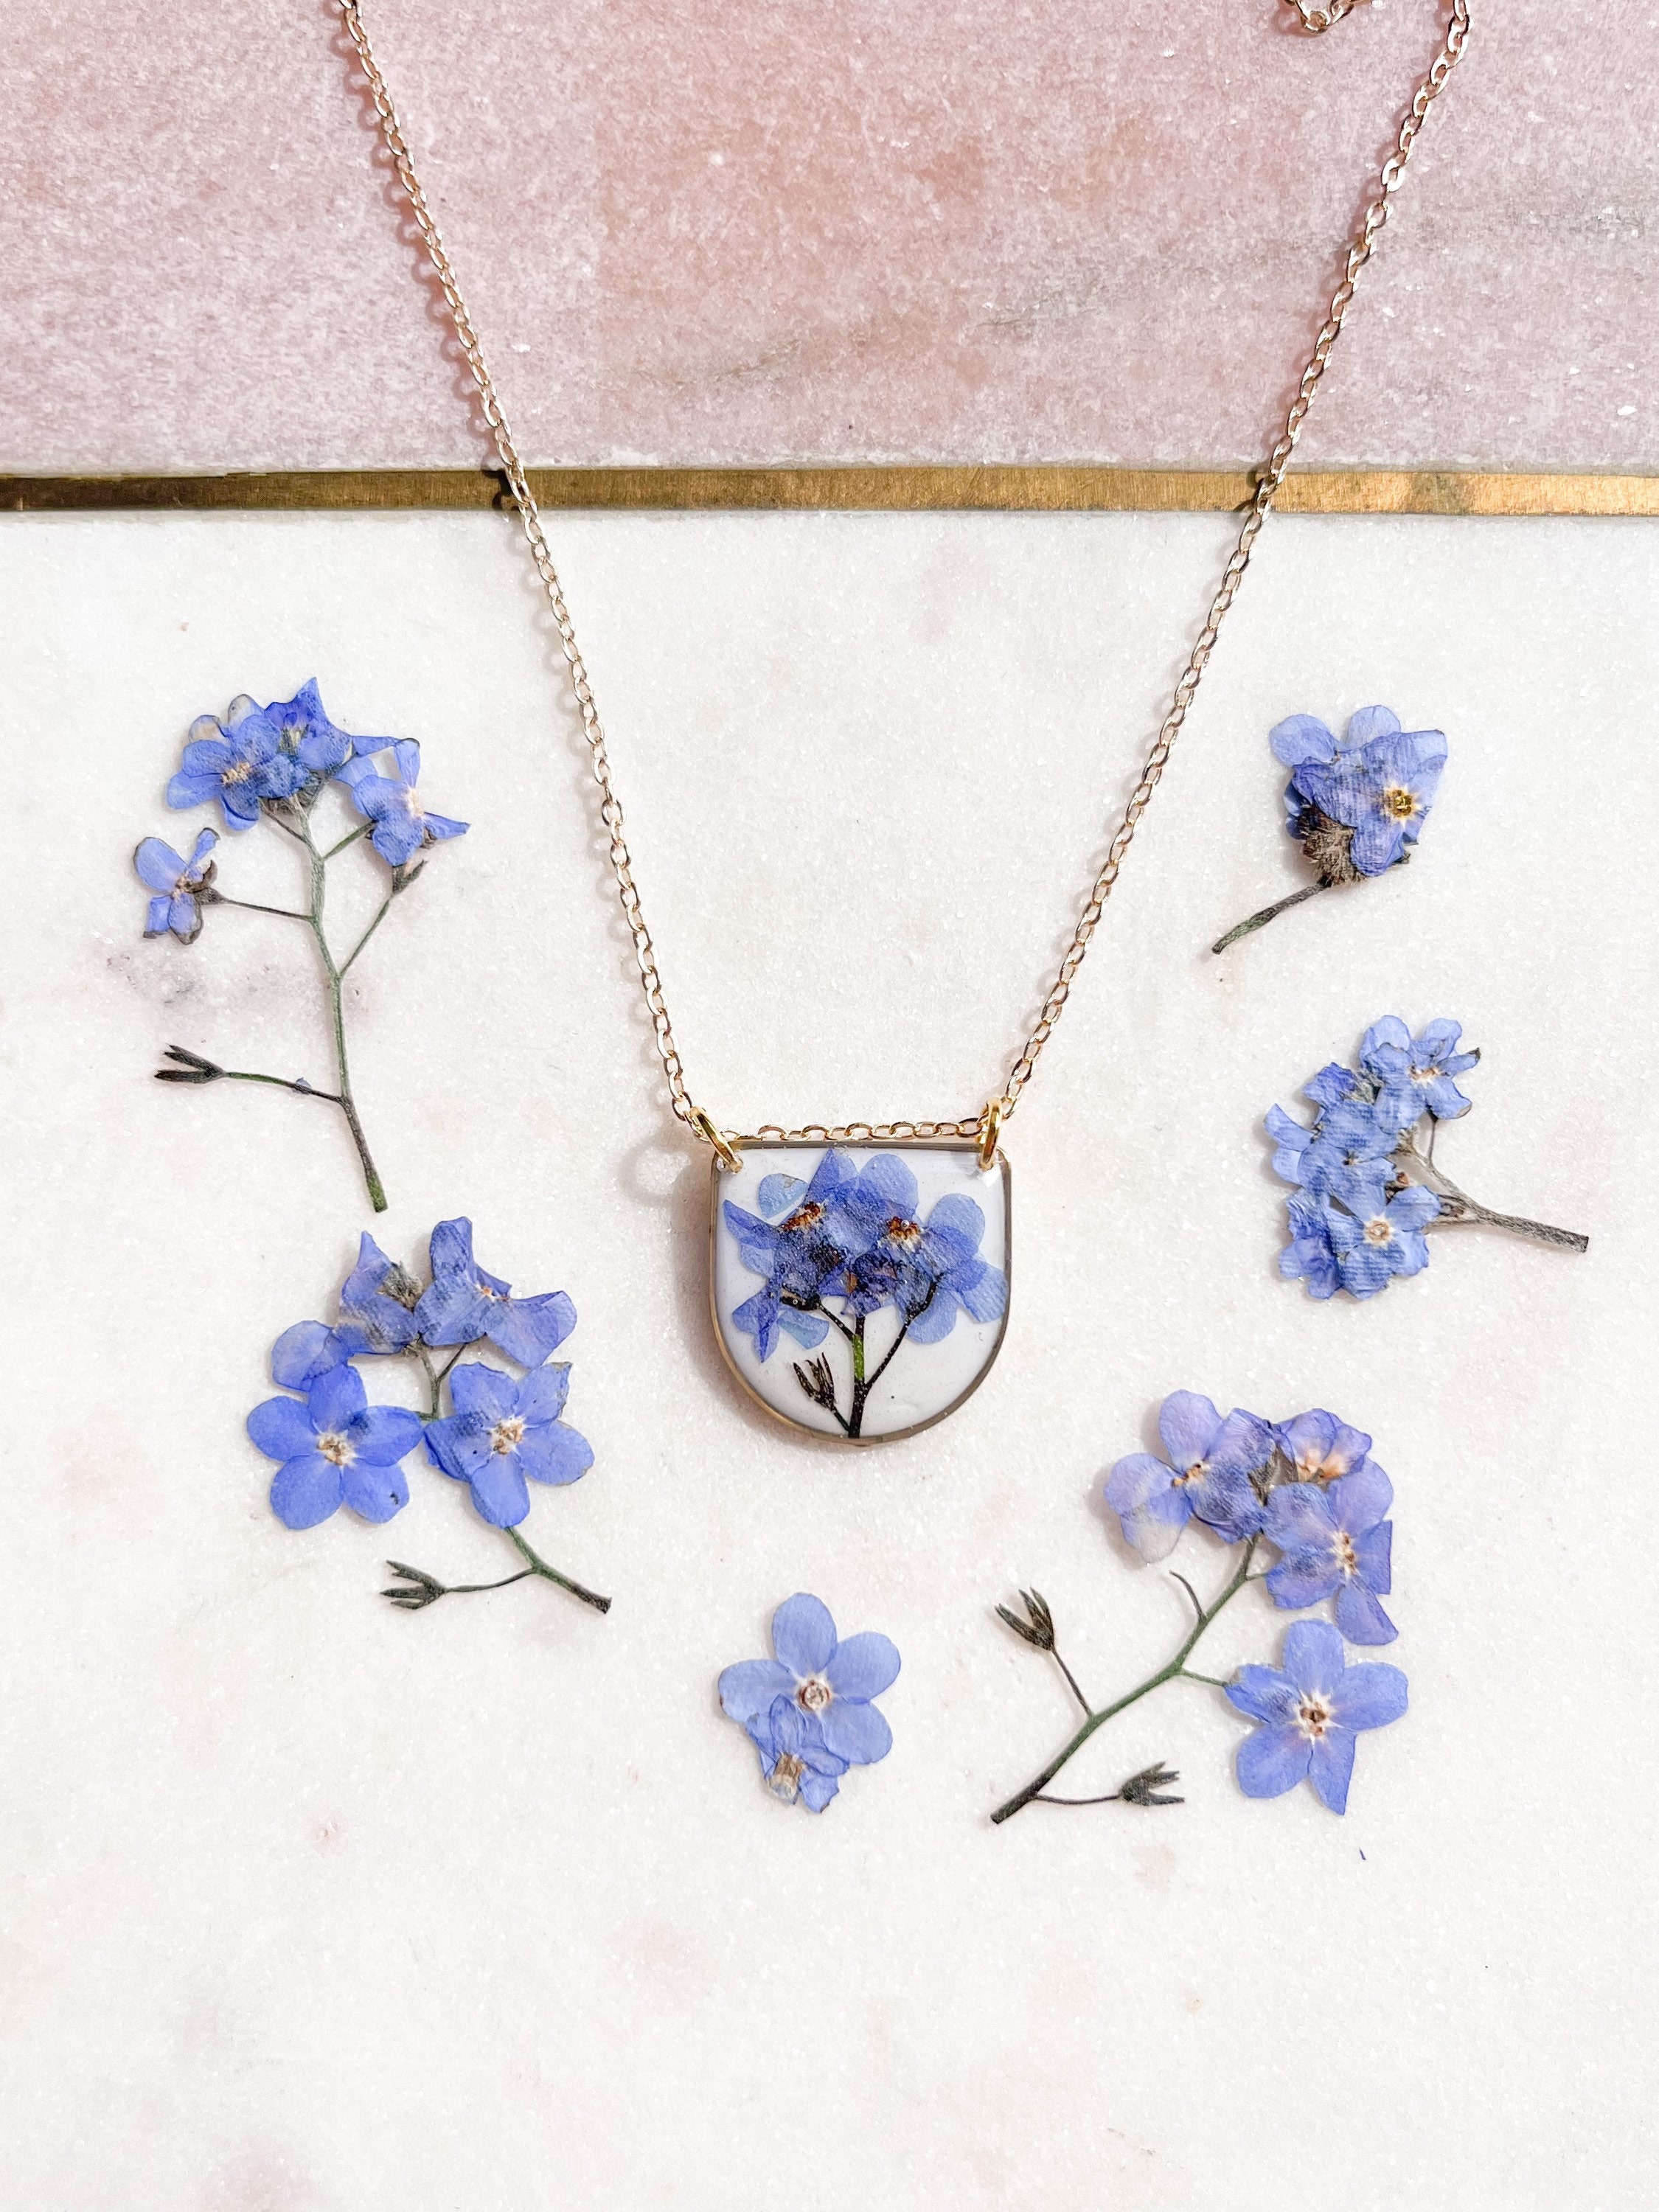 Pressed Flower Forget-Me-Not Necklace On 22K Gold Plated Chain/Botanical Jewellery Bridesmaid